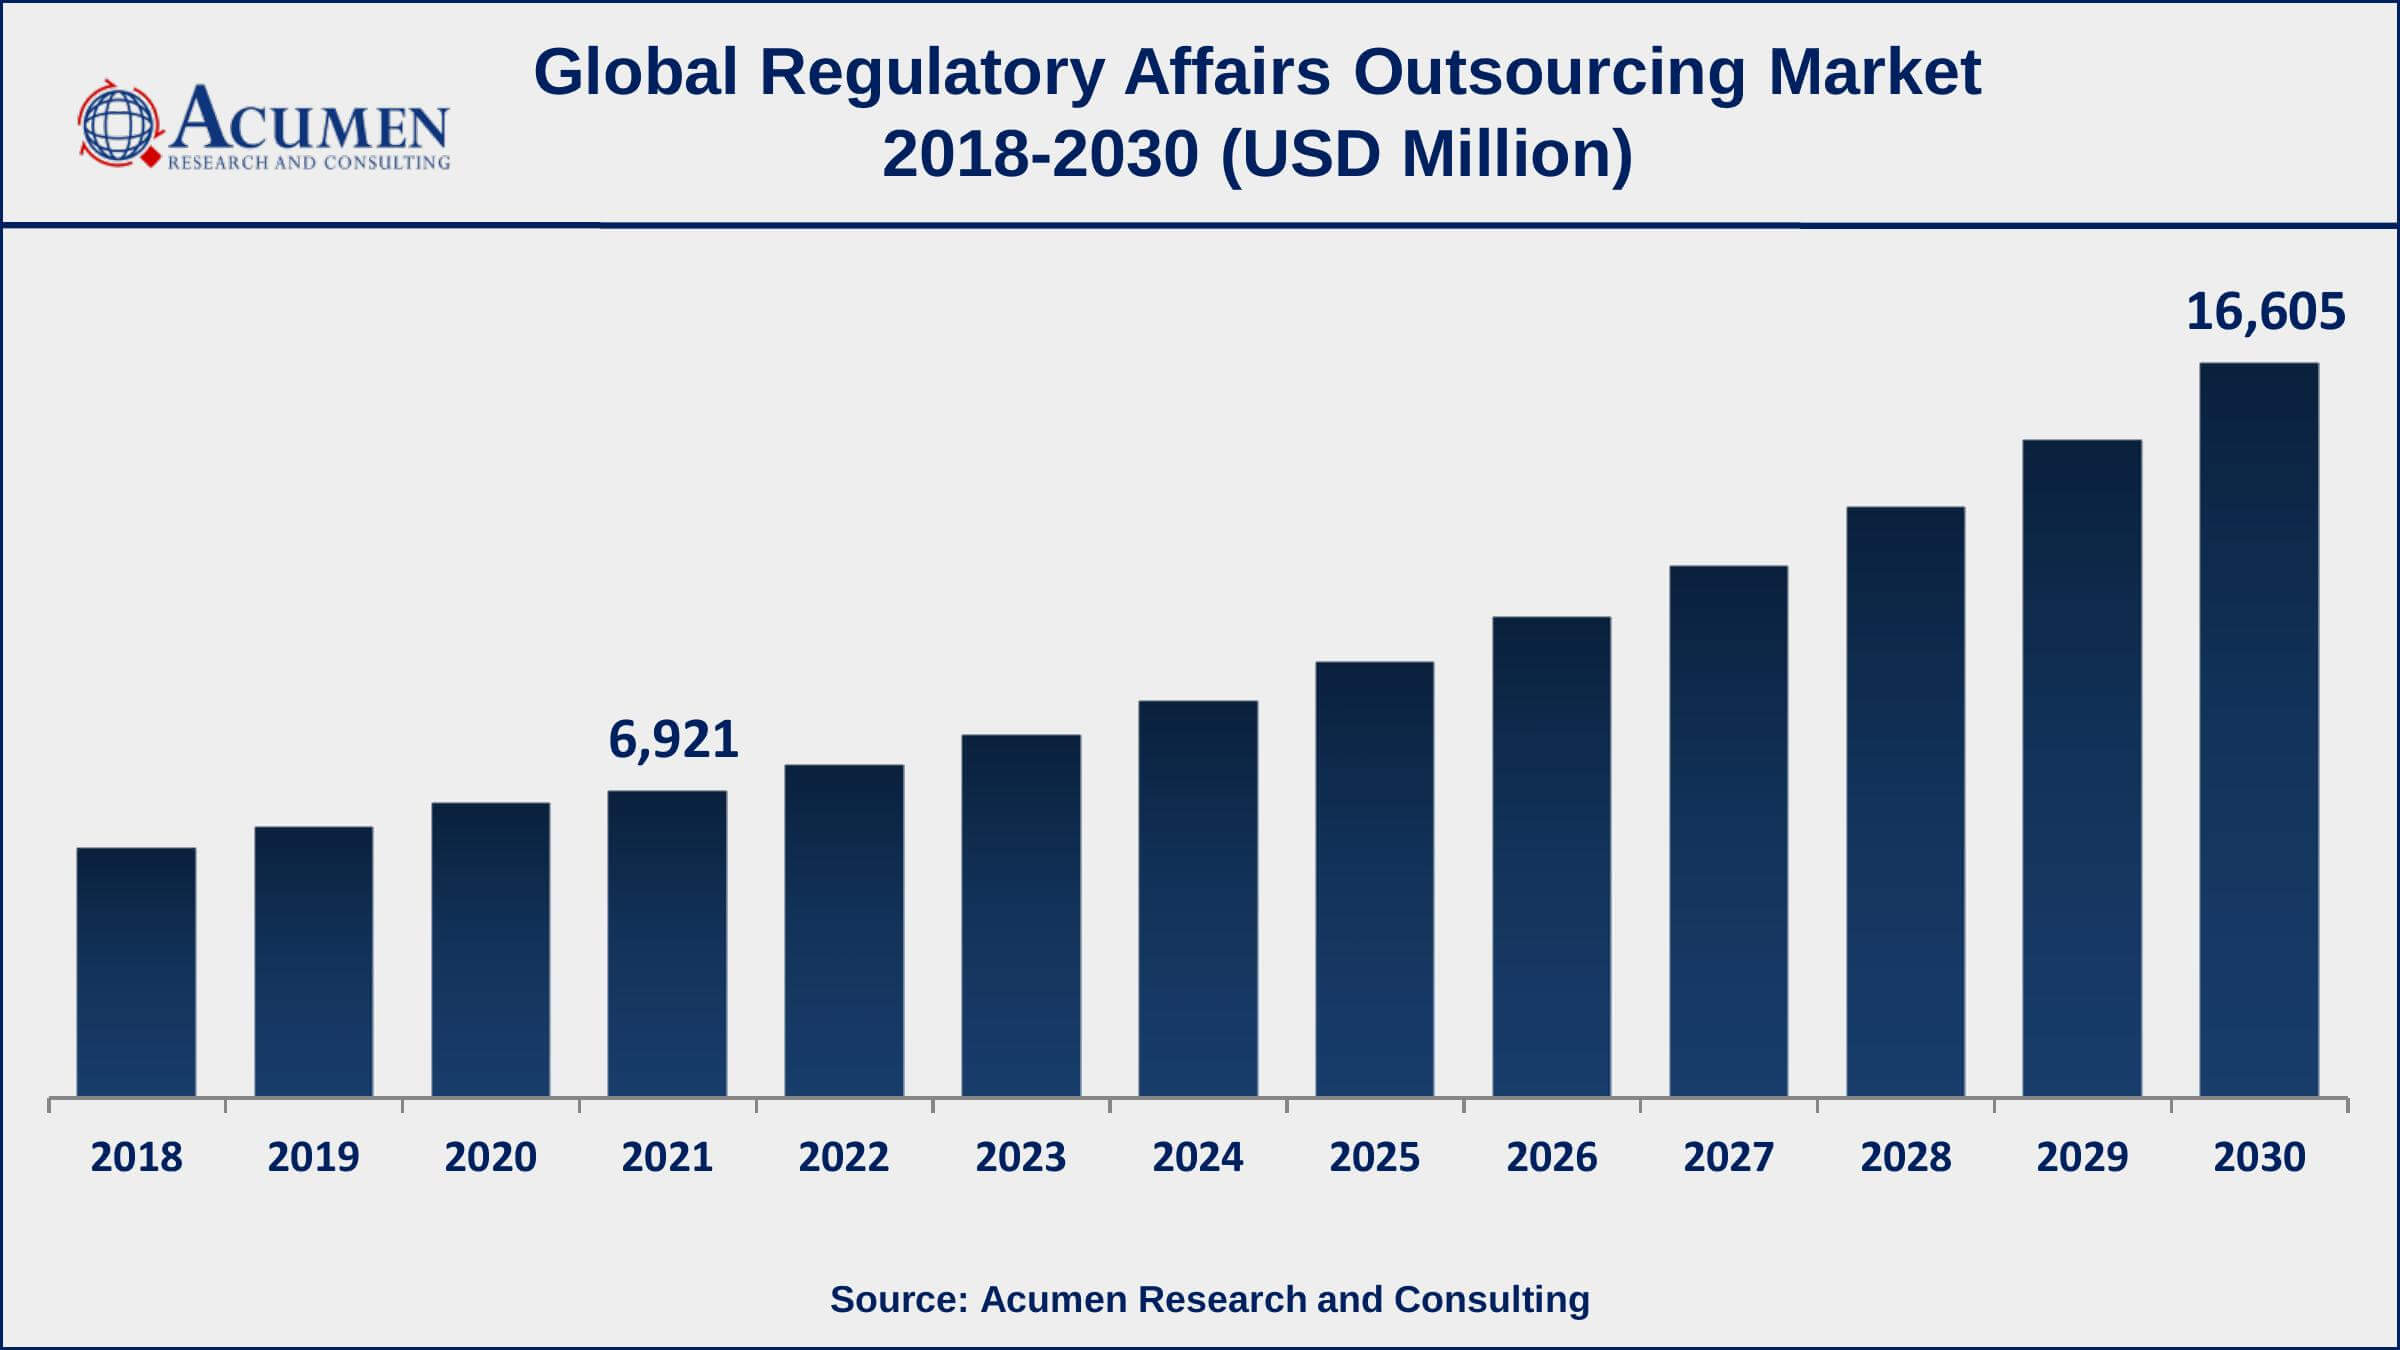 Europe regulatory affairs outsourcing market growth will observe highest CAGR from 2022 to 2030